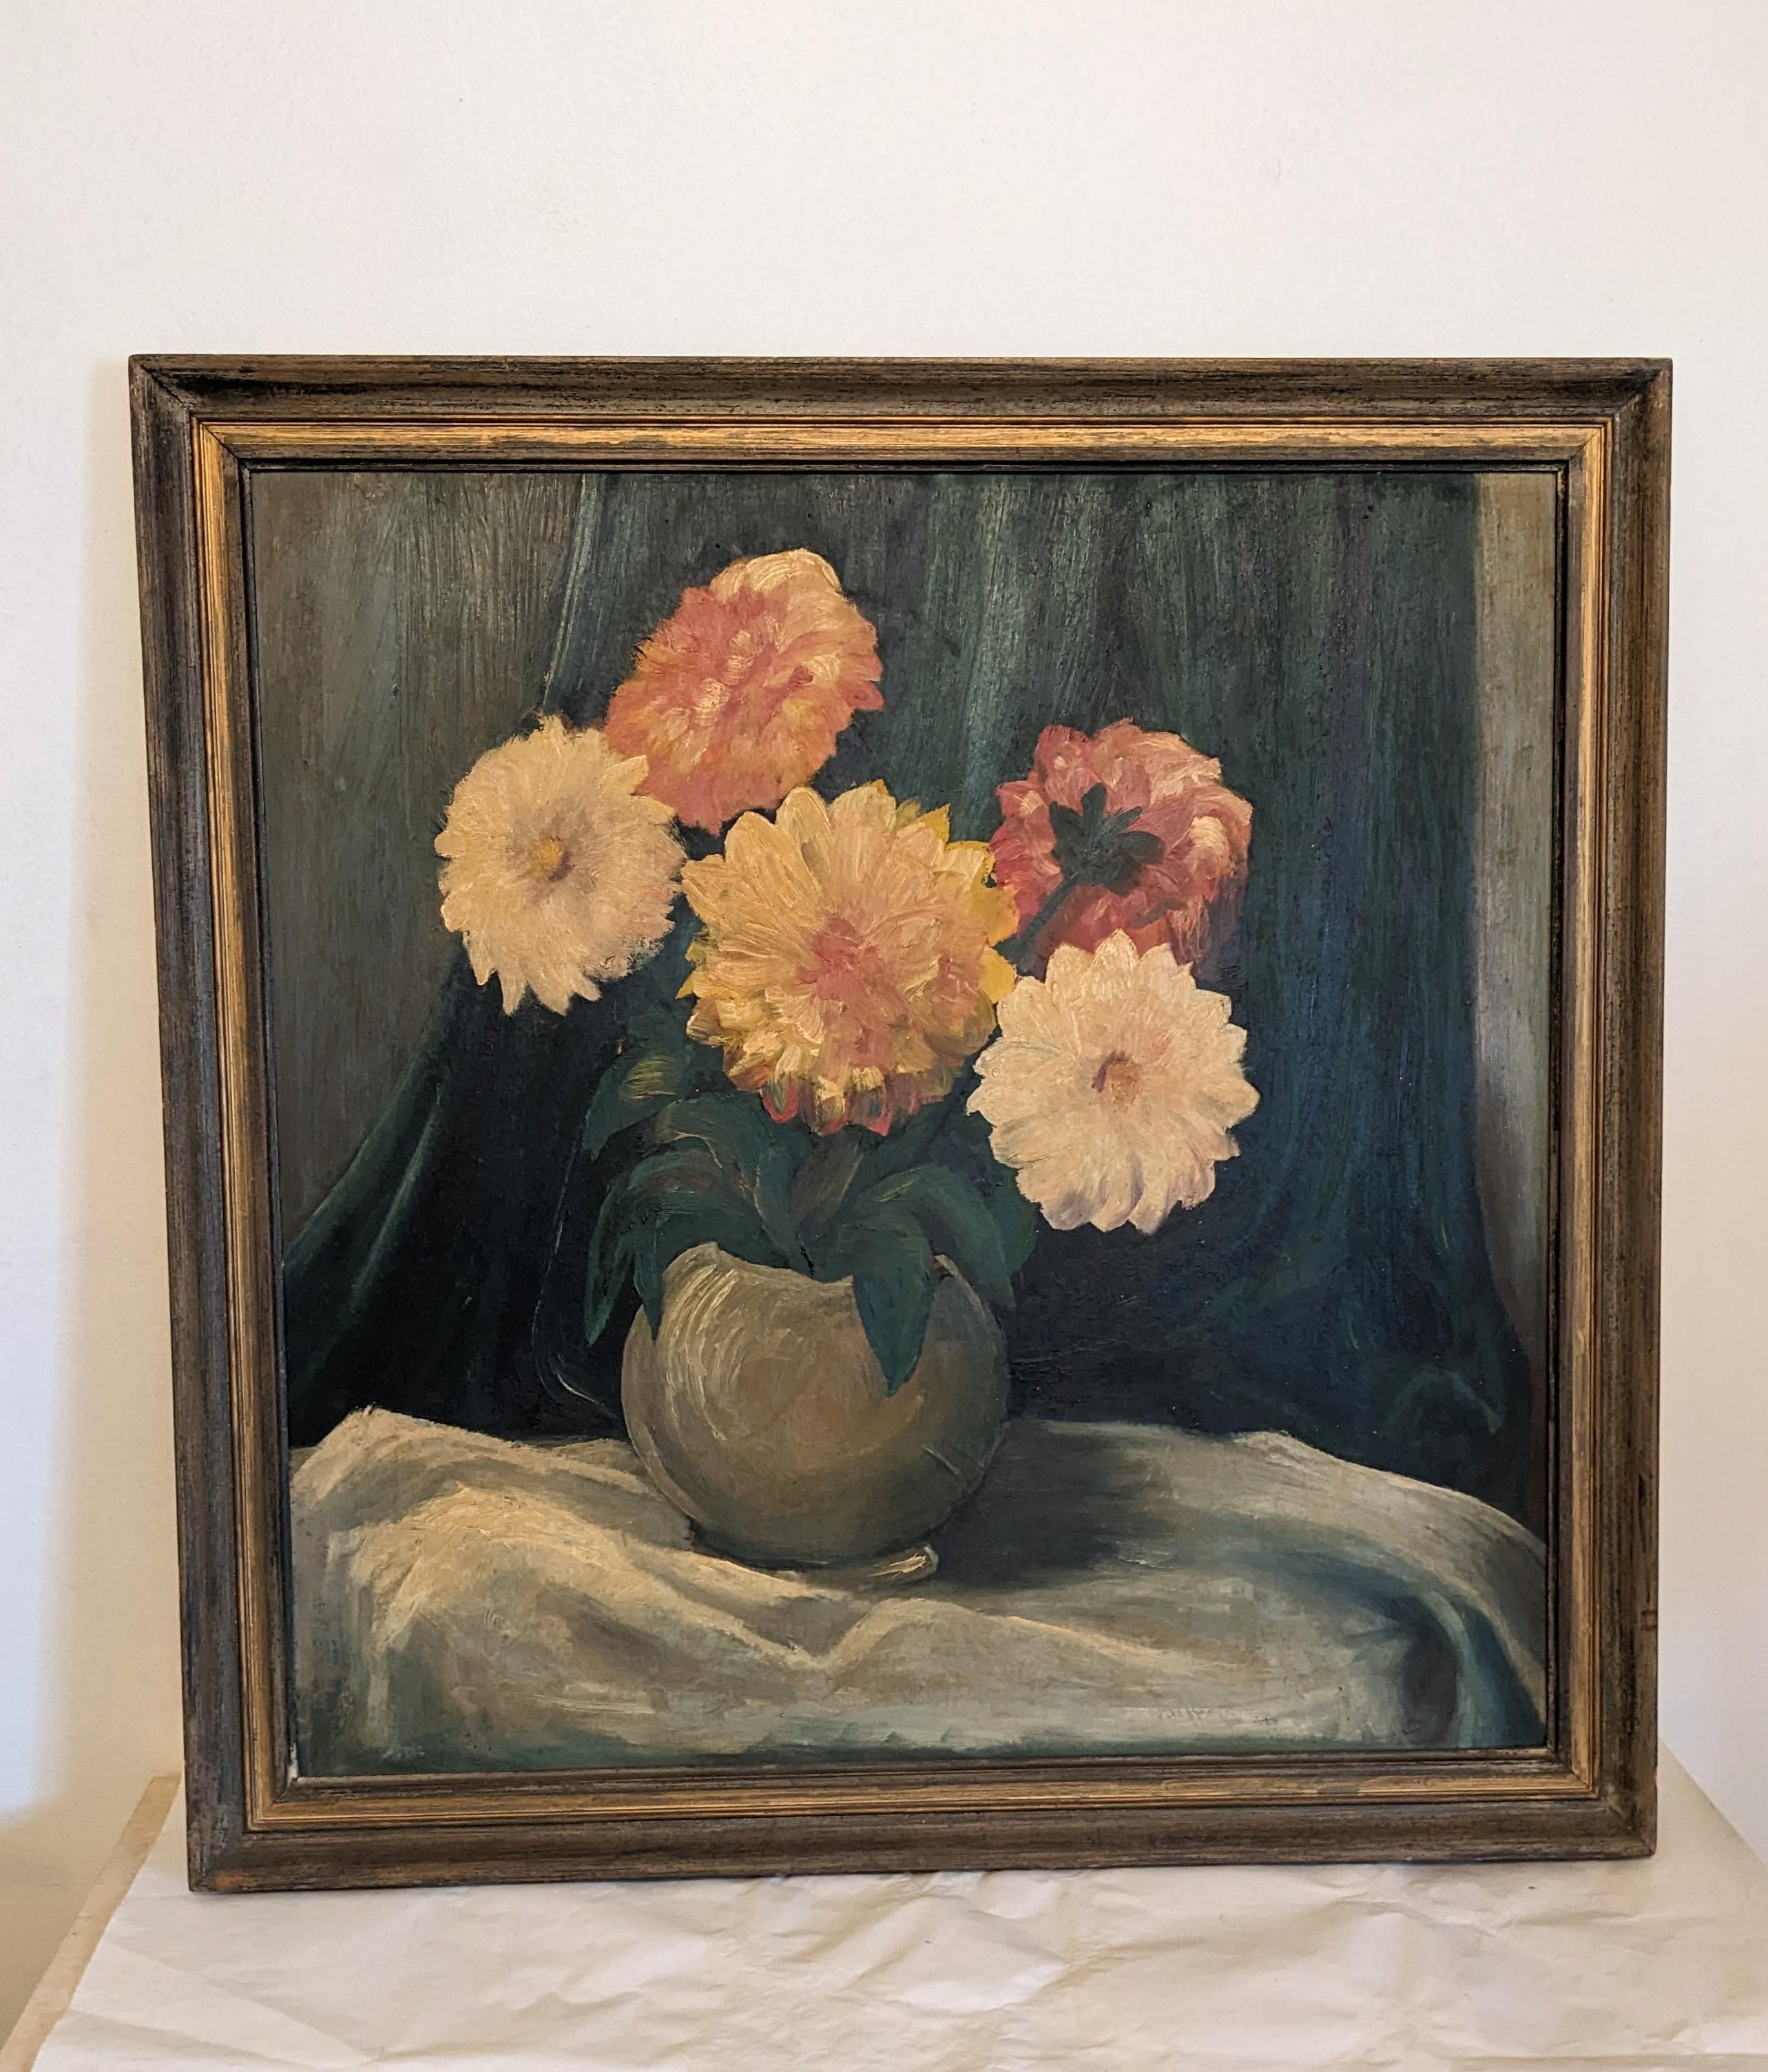 Lovely Art Deco impressionistic, interior still life study of a vase of vivid dahlias, circa 1930. Elegant matching 2 toned limed washed frame. 1930s USA.